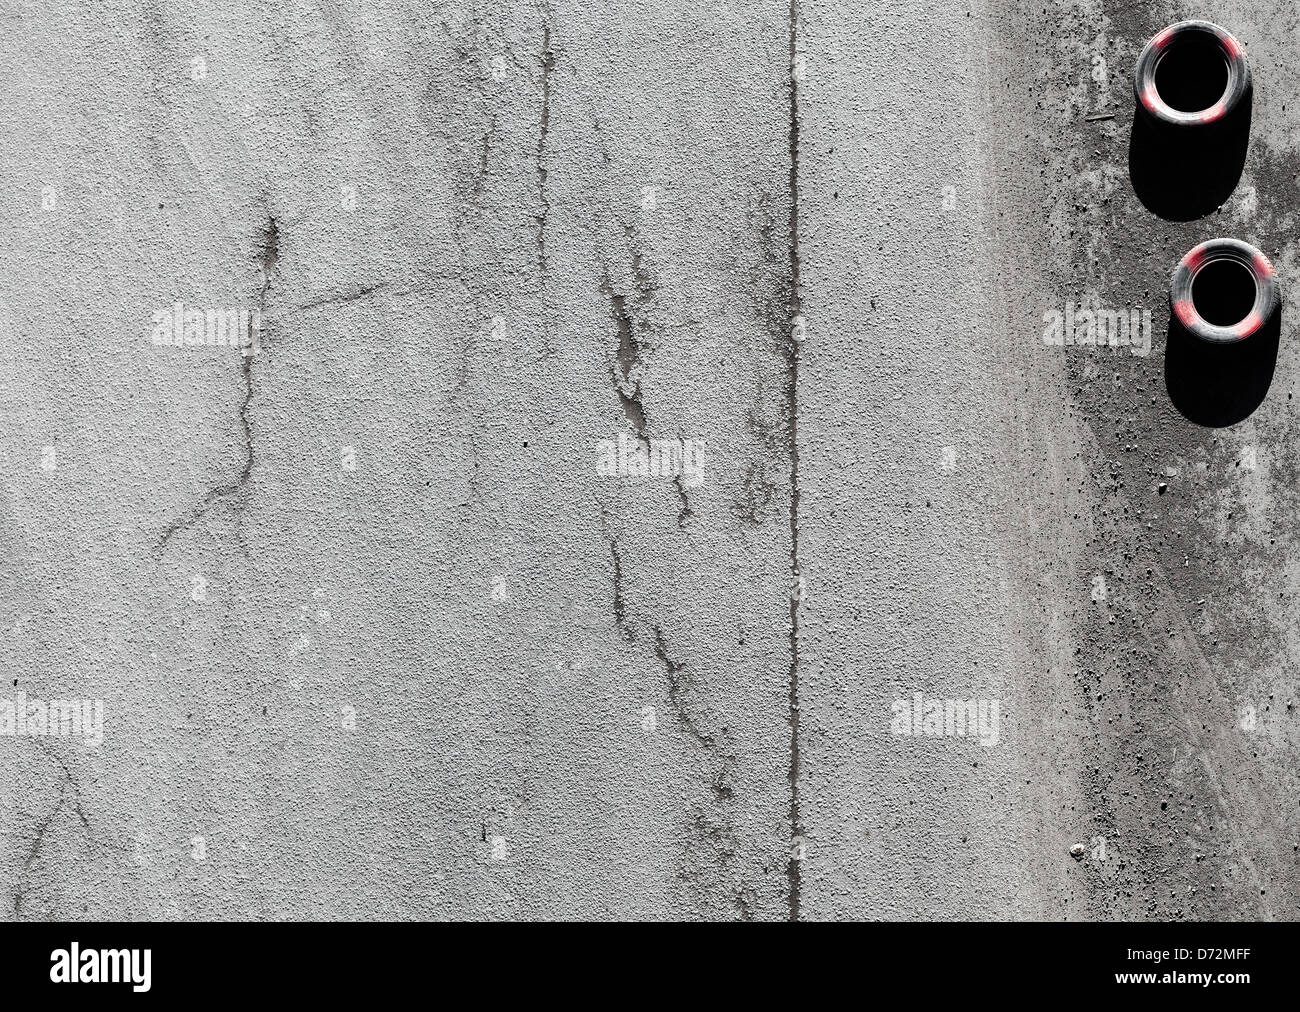 Background texture of an asphalt road surface with tires Stock Photo